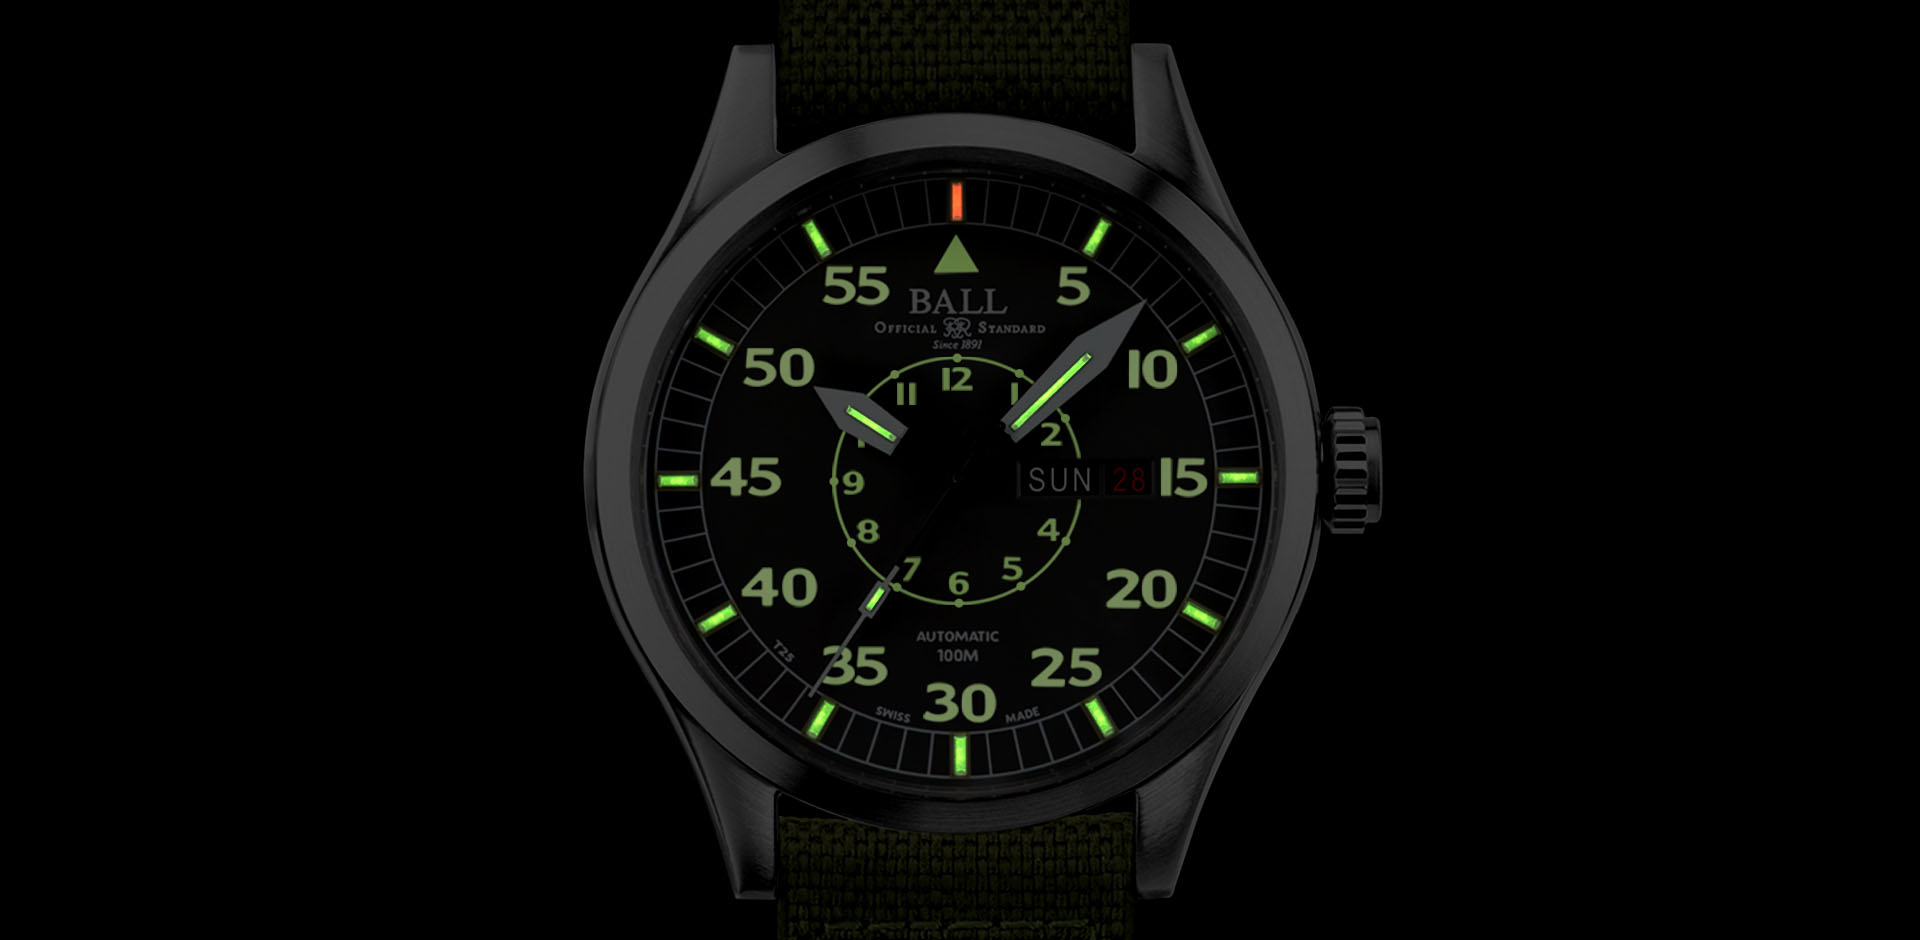 How To Tell A Real Or Fake Bell & Ross